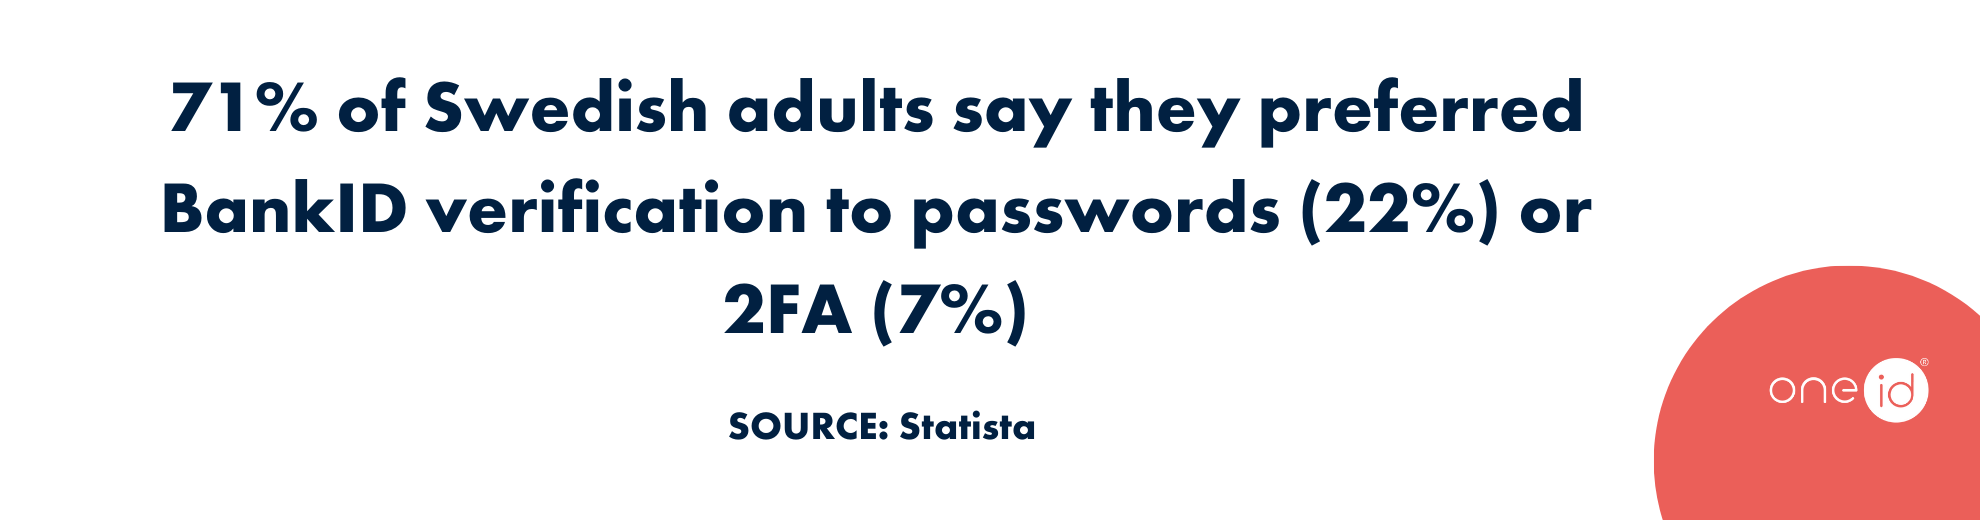 71% of Swedish adults say they preferred BankID verification to passwords (22%) or 2FA (7%) (Statista)